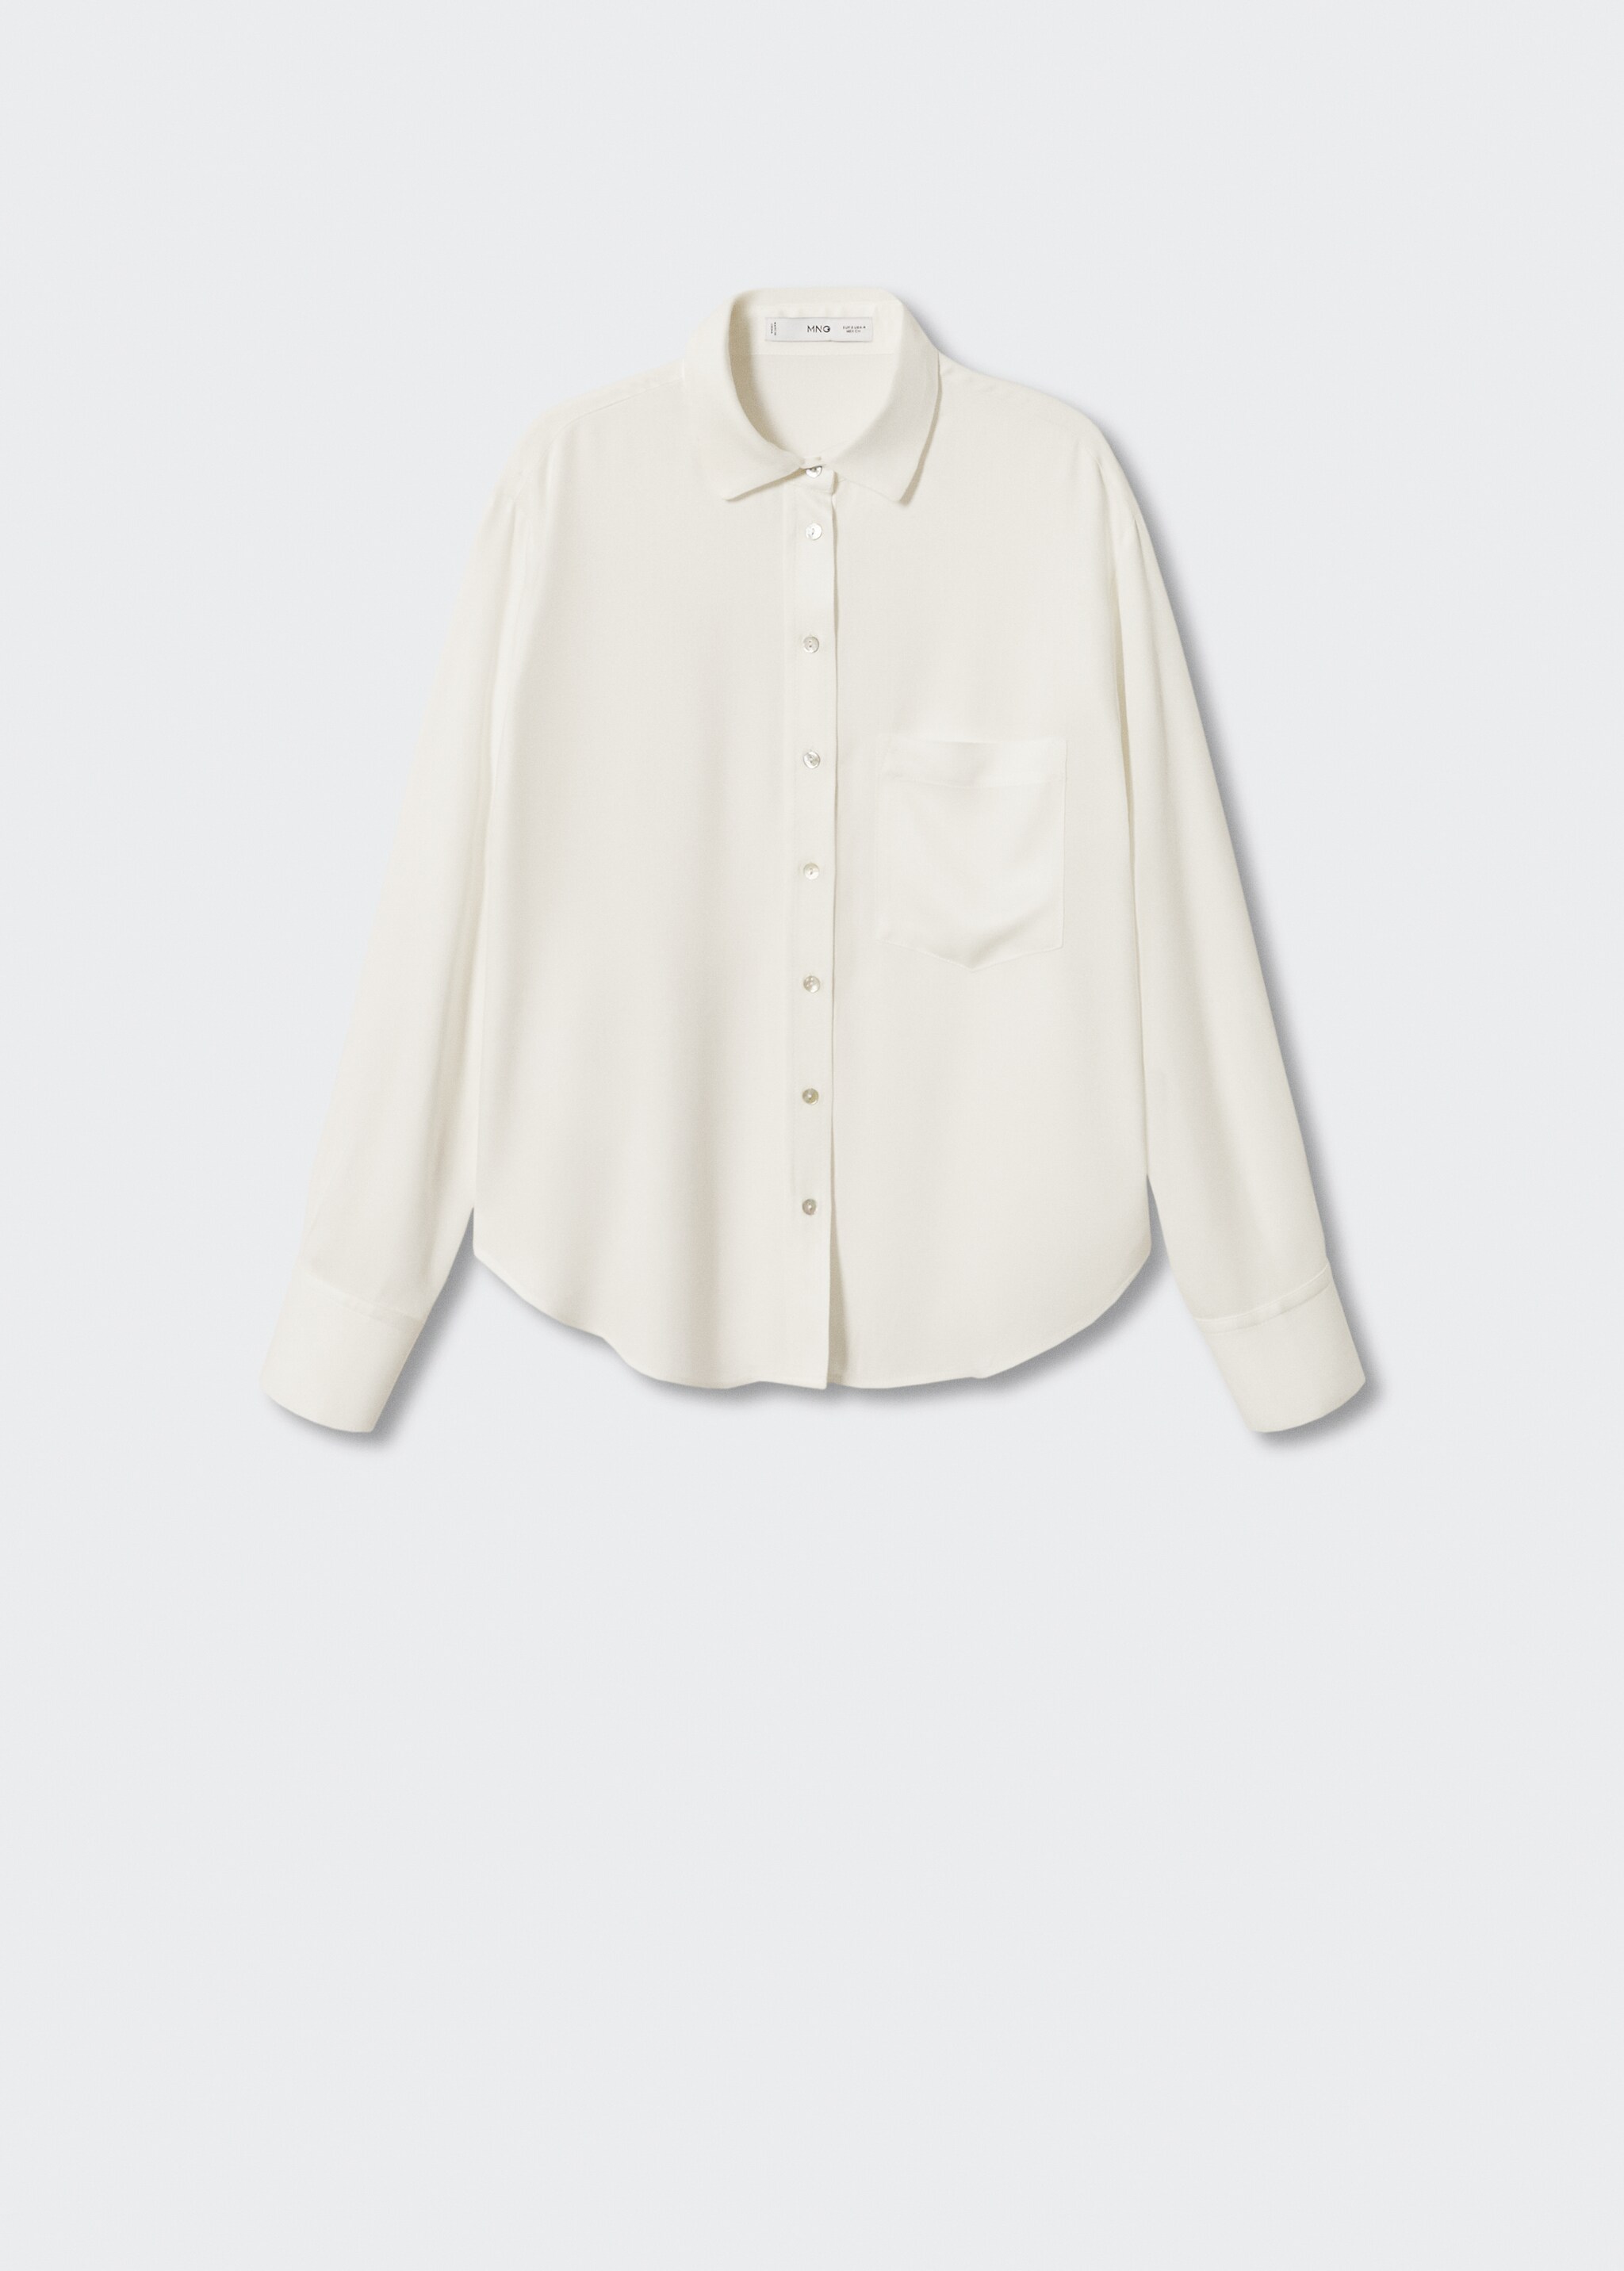 Nacre buttoned shirt - Article without model